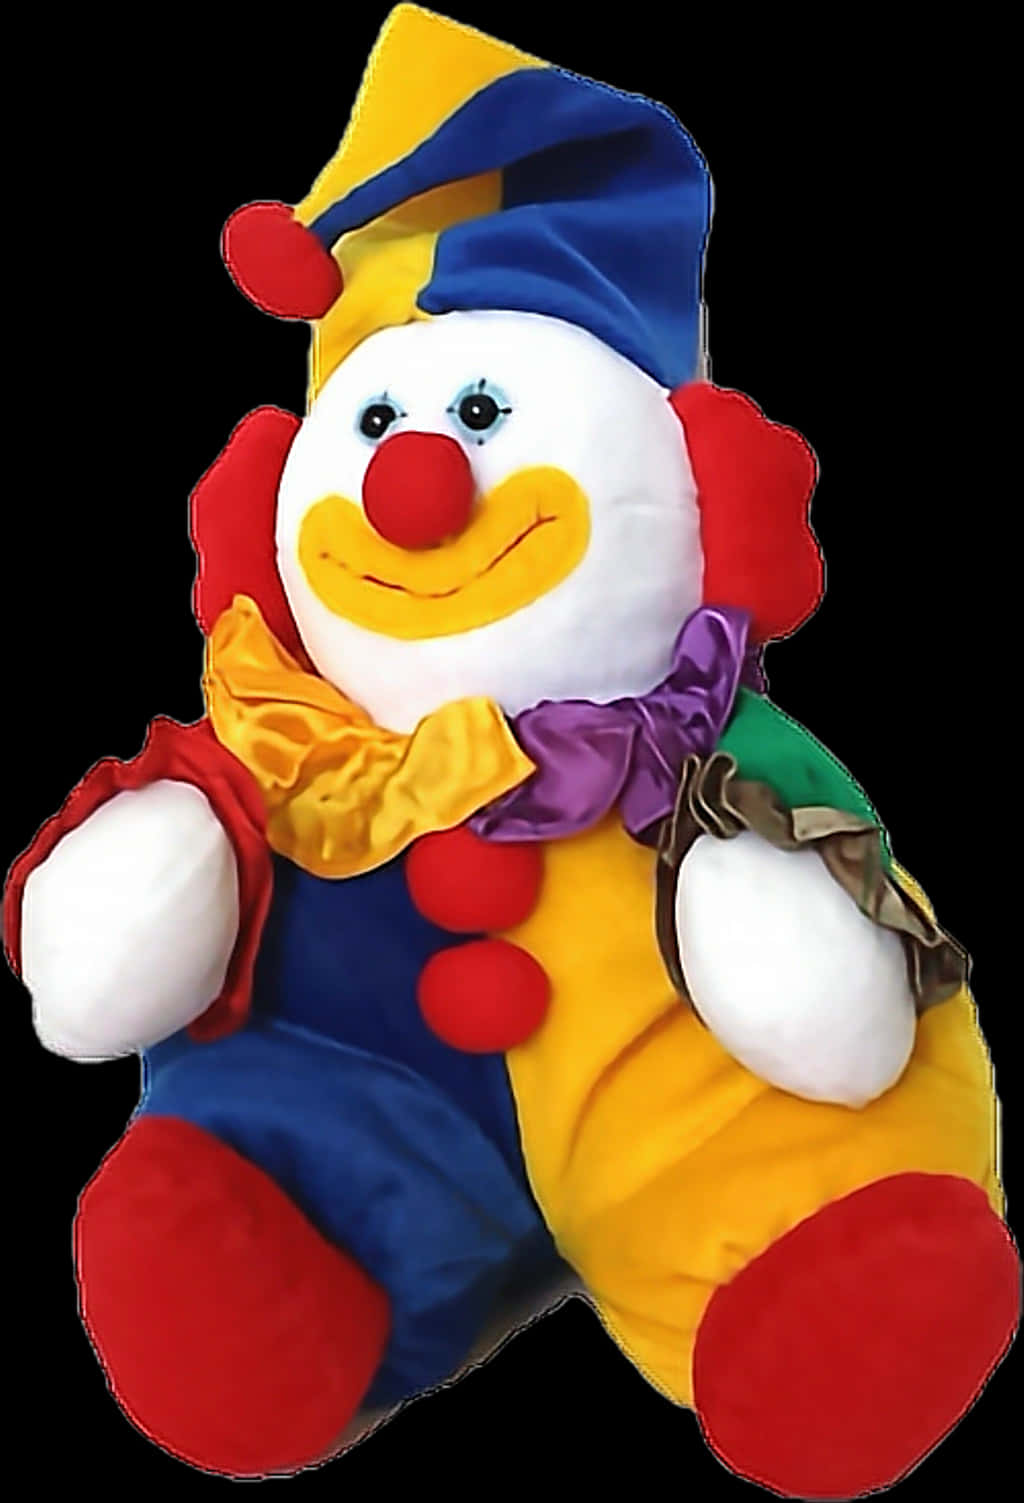 A Stuffed Toy Clown With A Hat And Scarf